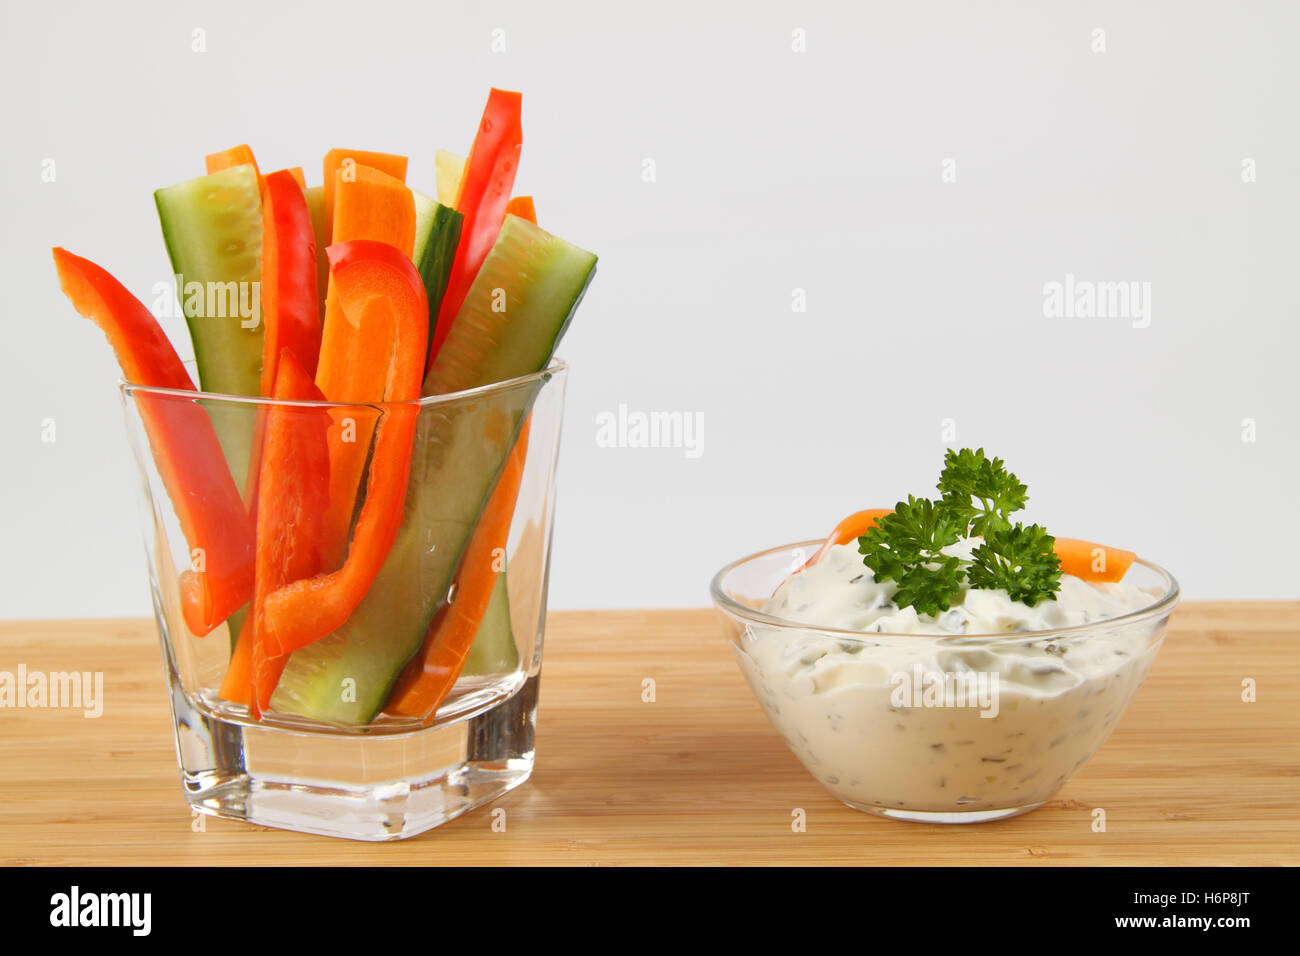 fruits vegetables Stock Photo